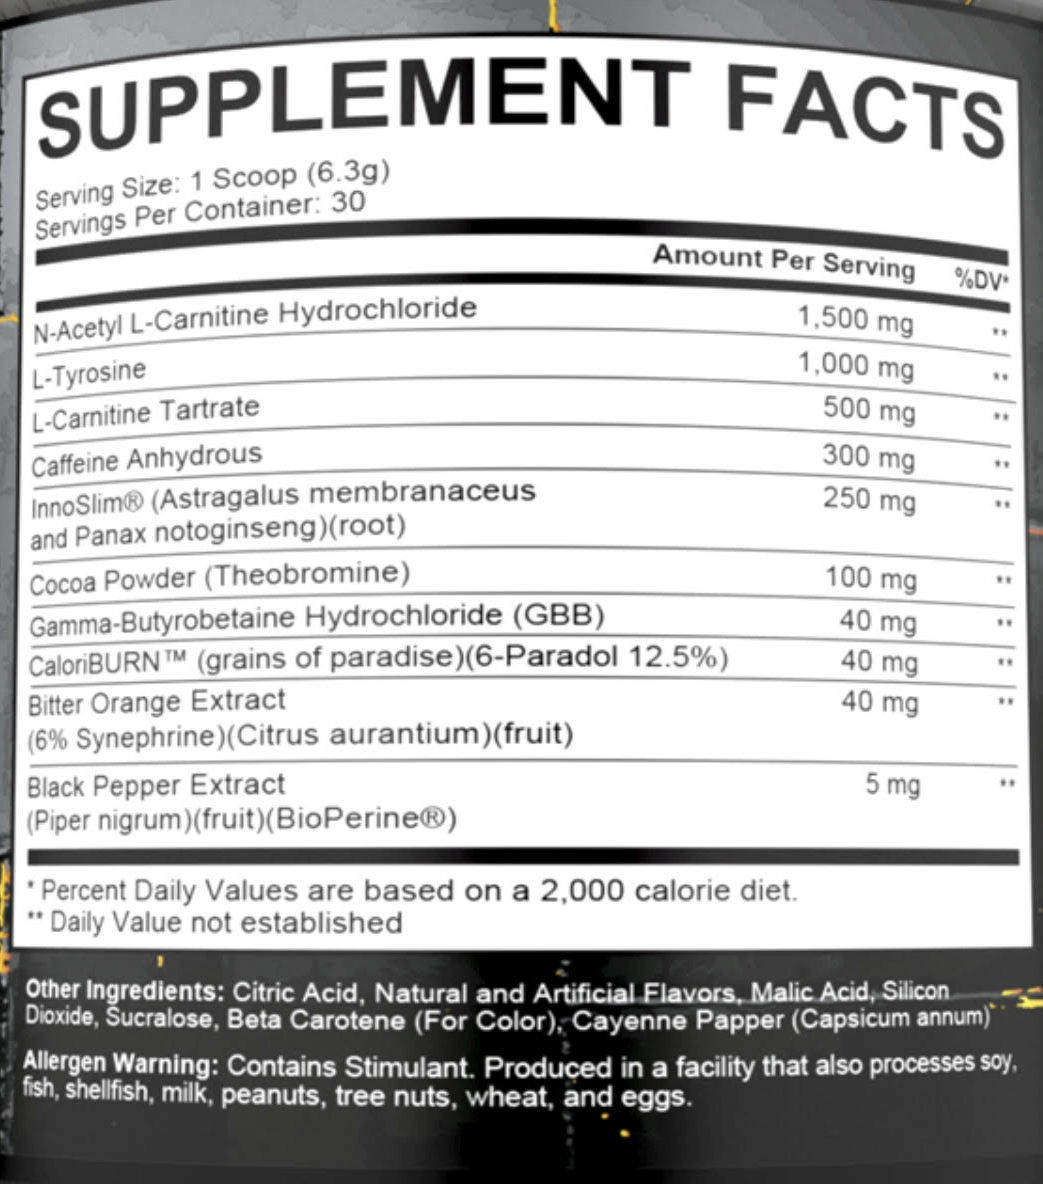 Supplement facts panel for a product with ingredients including N-Acetyl L-Carnitine, L-Tyrosine, Caffeine, Astragalus, and Cocoa Powder. Allergen warning included.